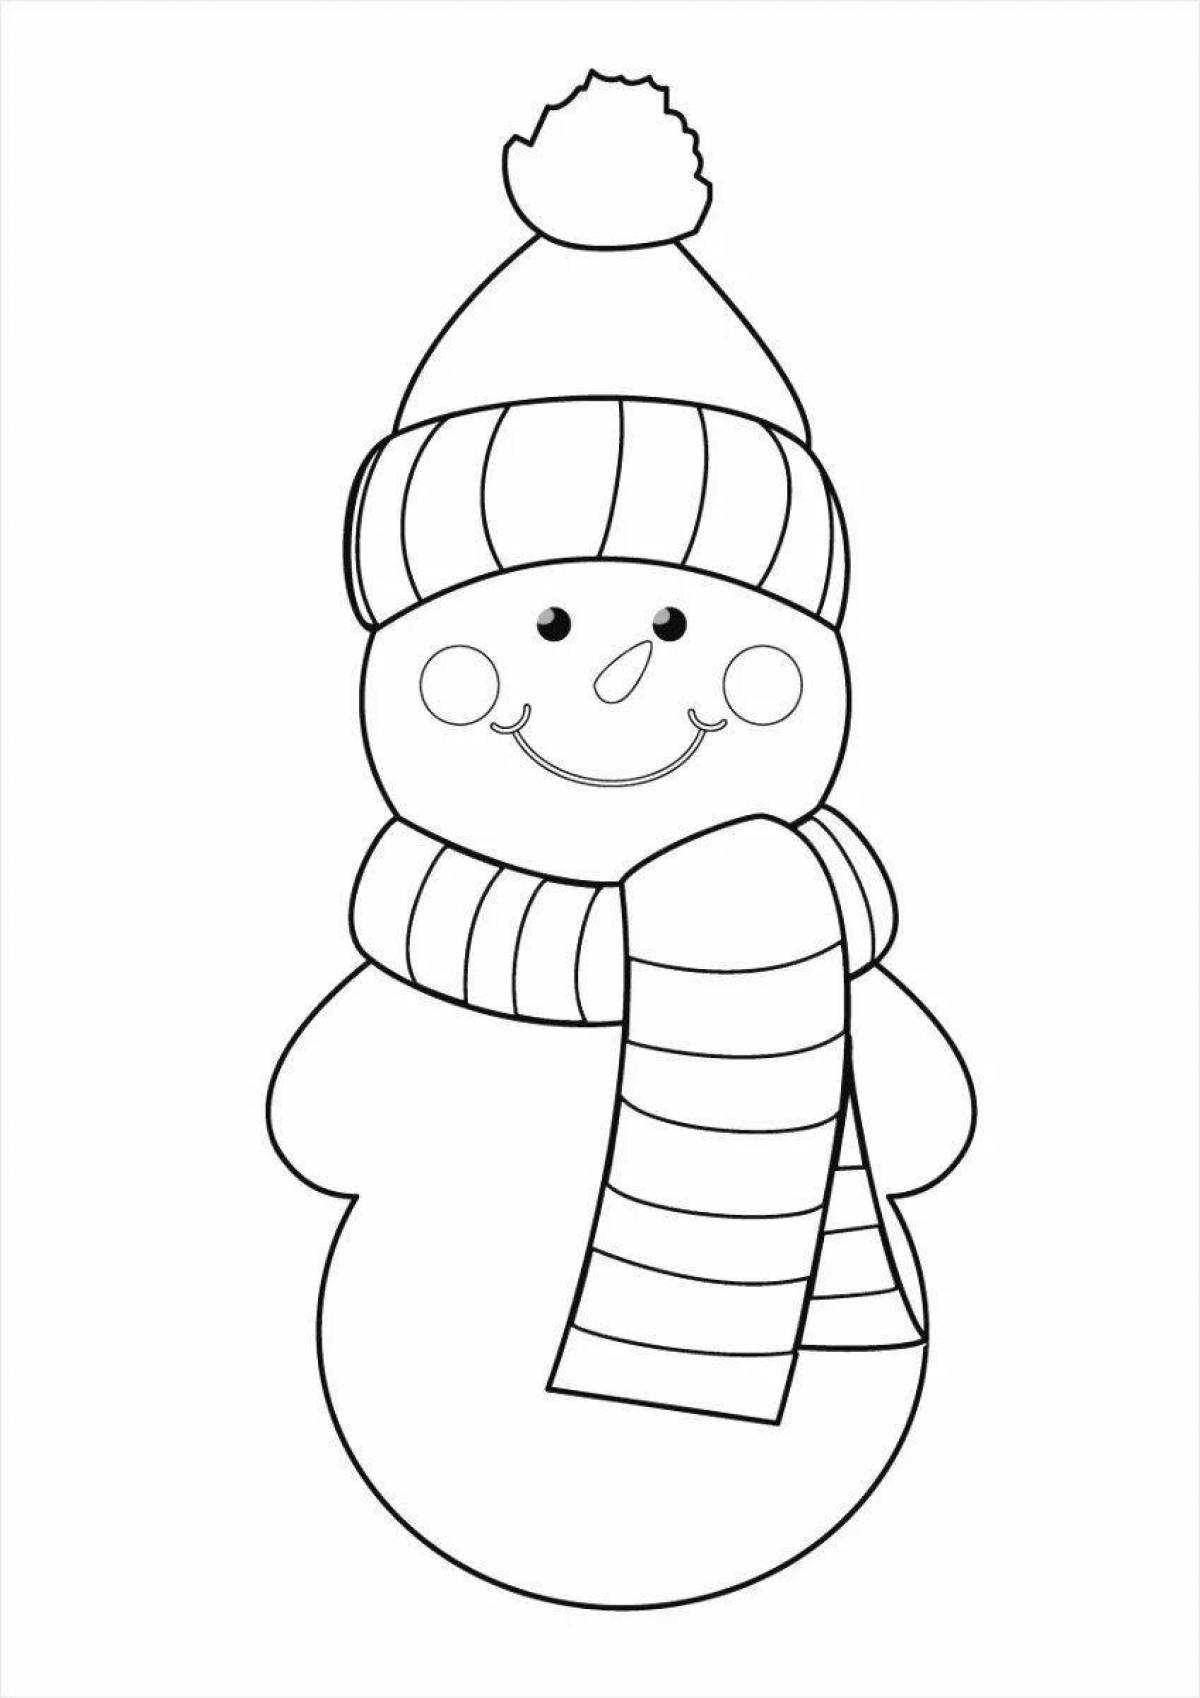 Colorful snowman coloring book for children 2-3 years old